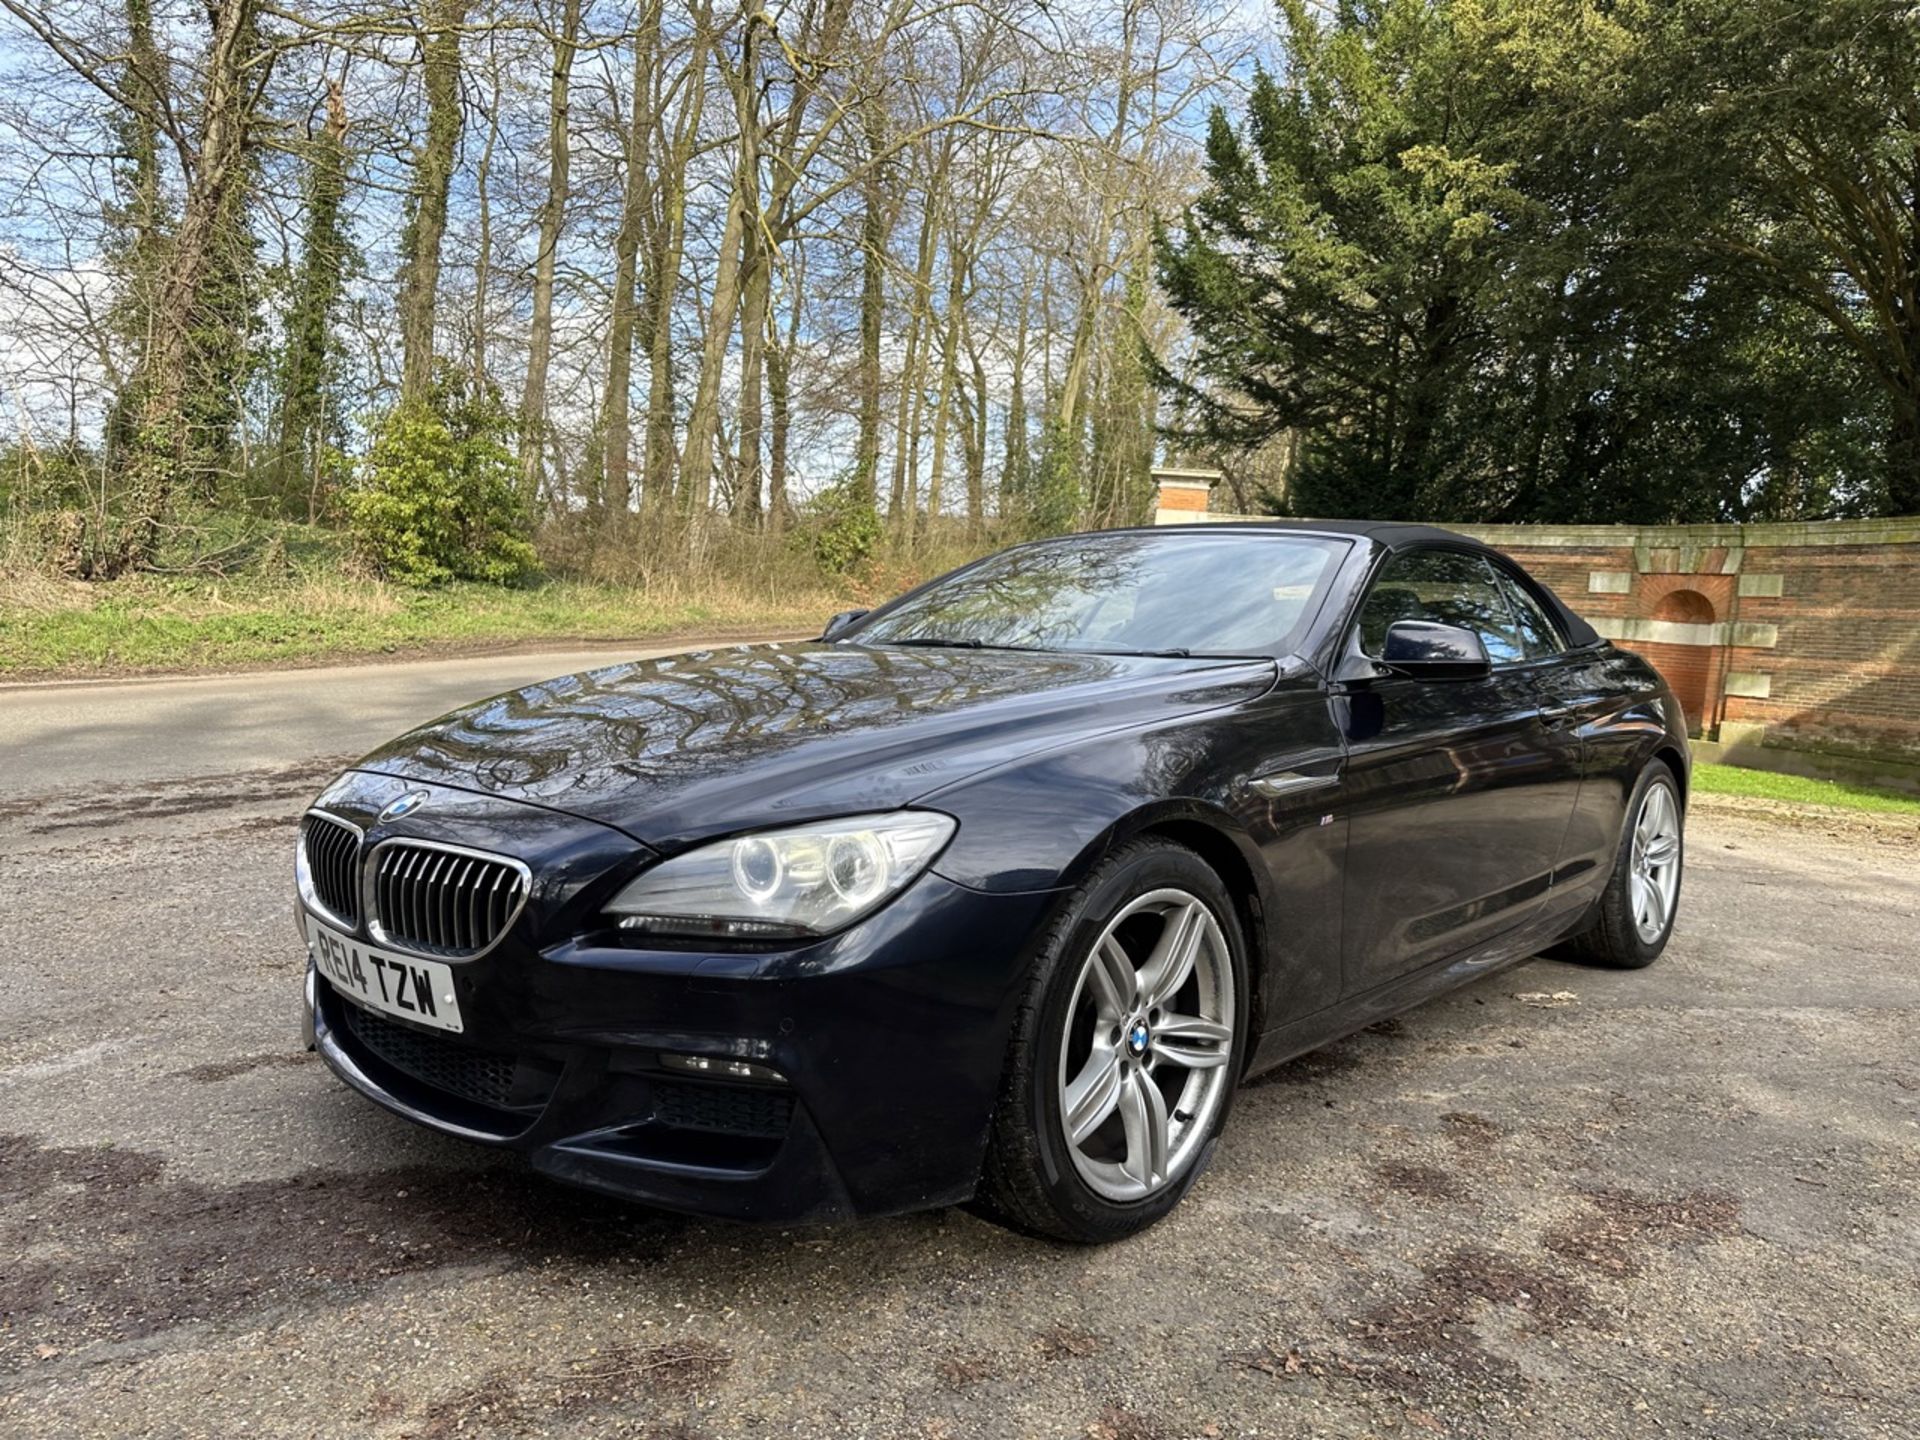 BMW 6 SERIES 640d (M SPORT) Ultimate Summer Car - AUTOMATIC - Convertible - 2014 - 3L Diesel - Image 9 of 18